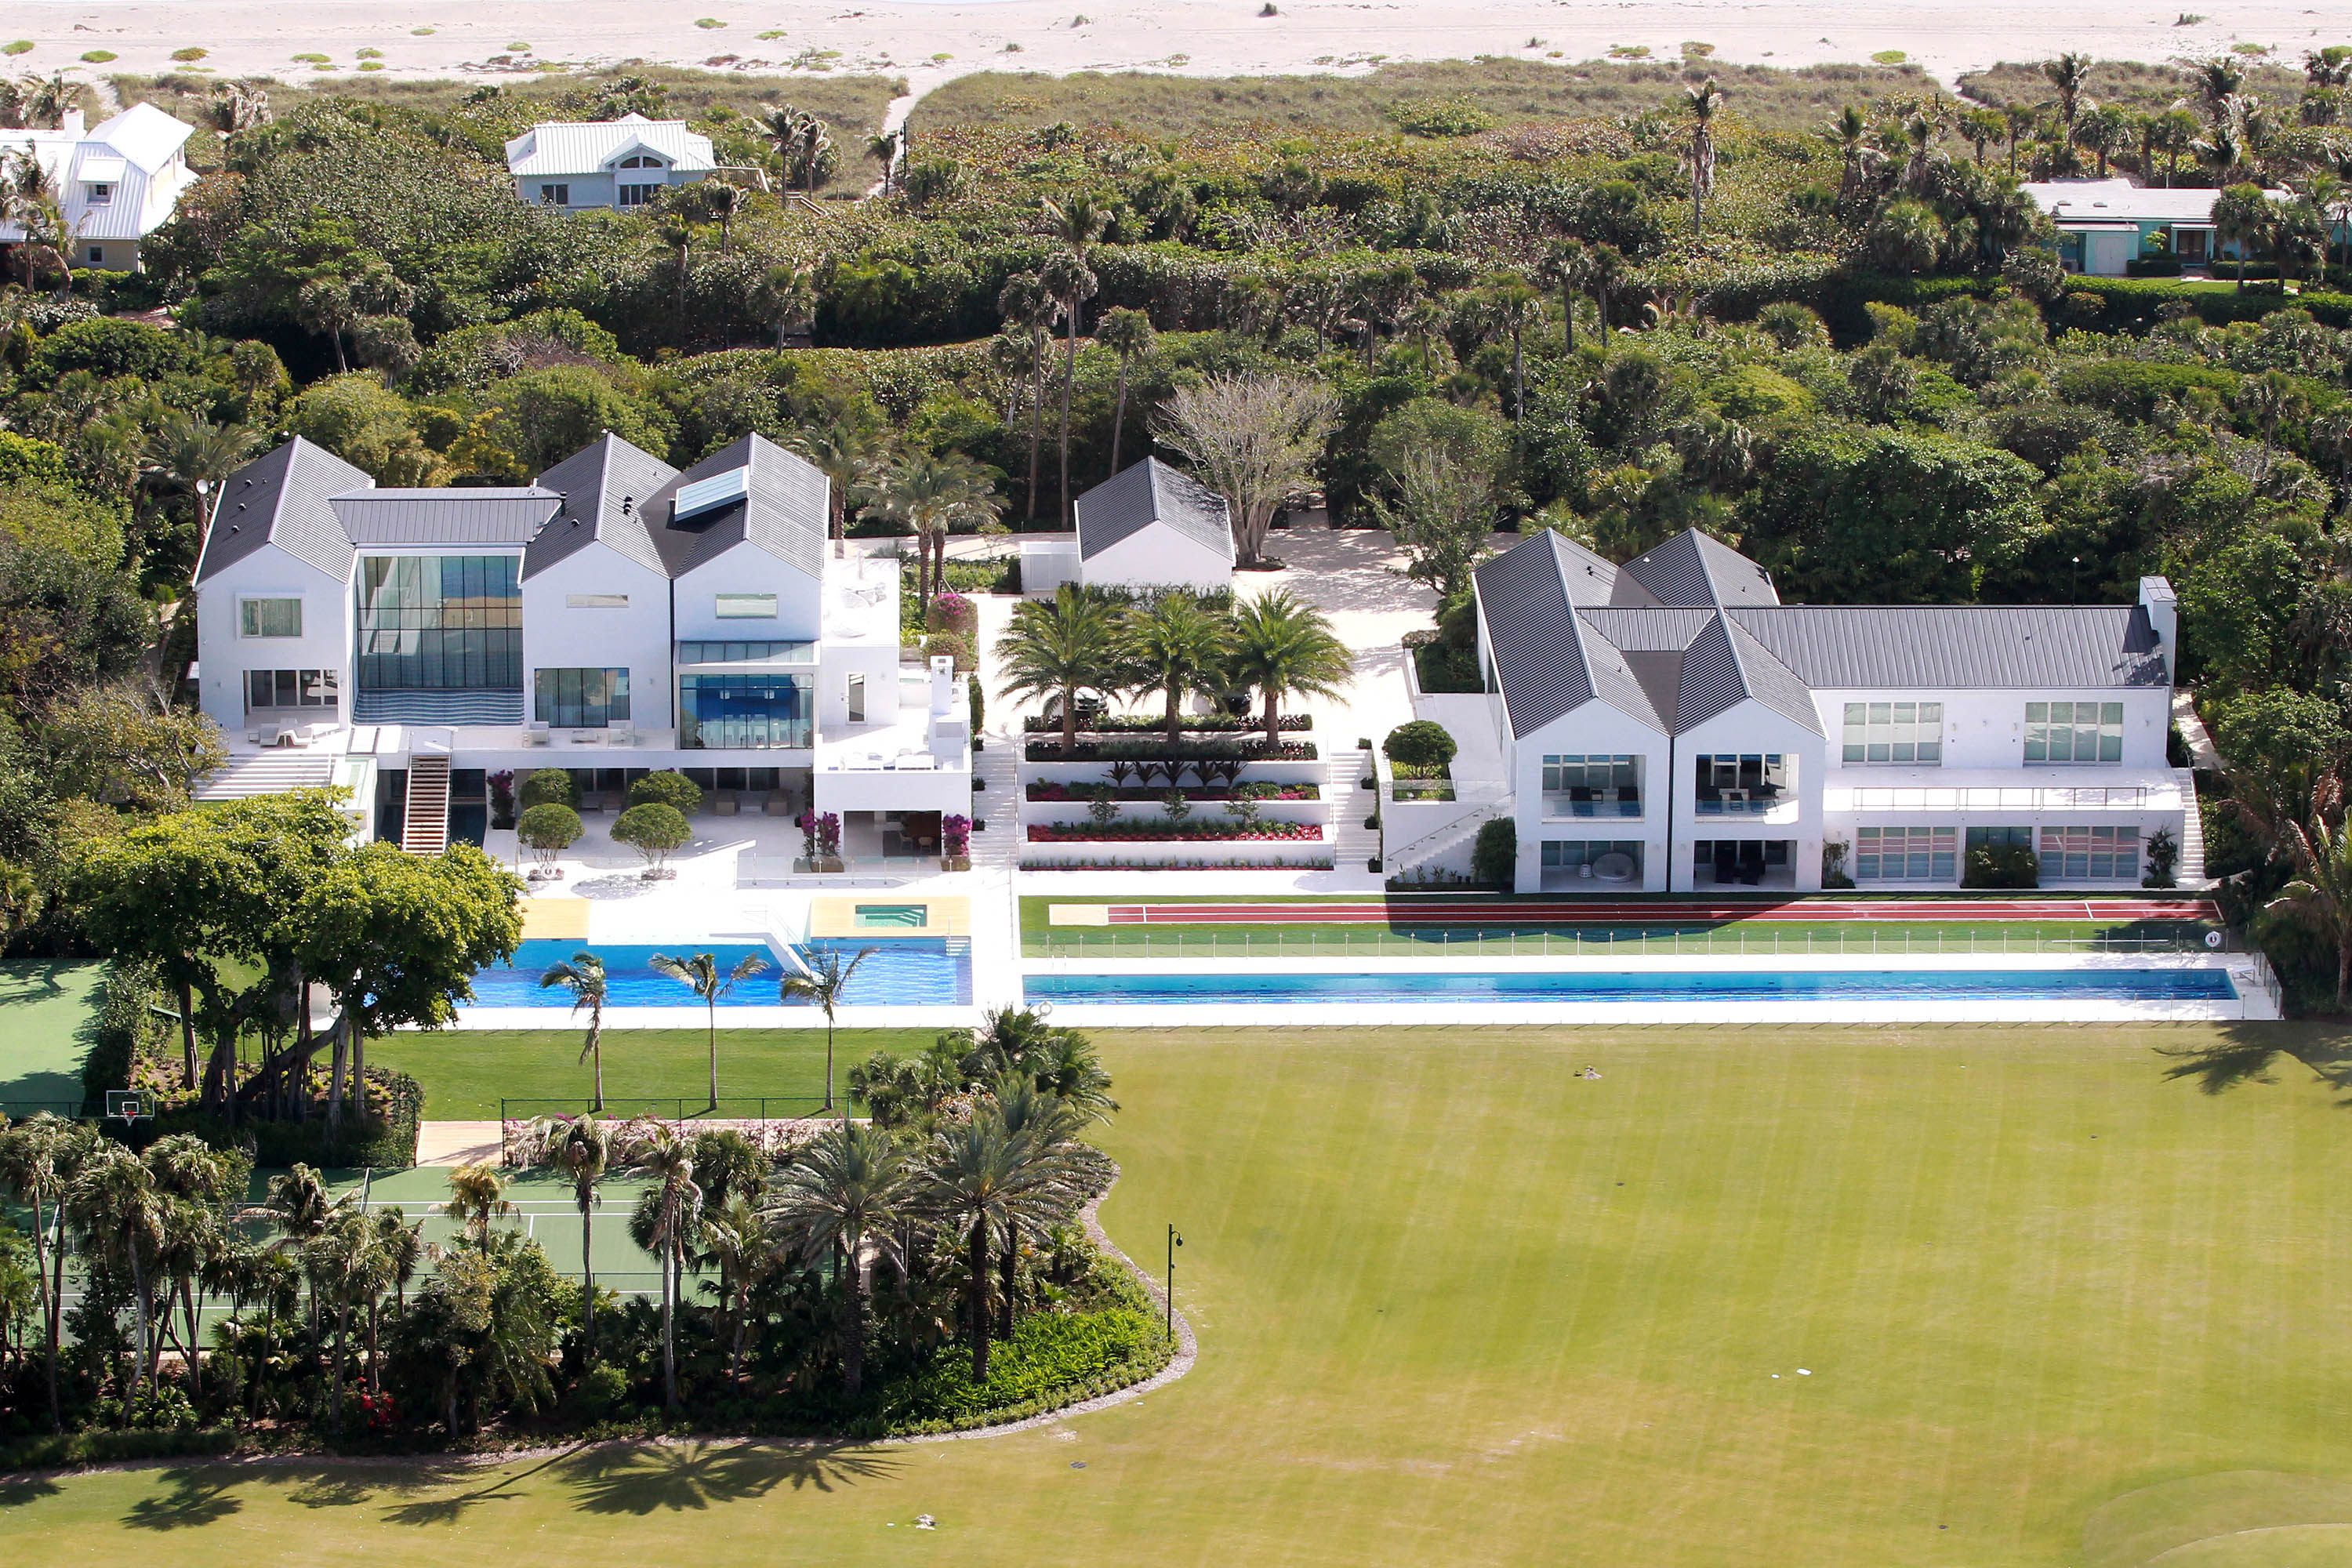 , Tiger Woods has an incredible lifestyle living in a Florida home worth £41m, and plays at £100k per-year golf club